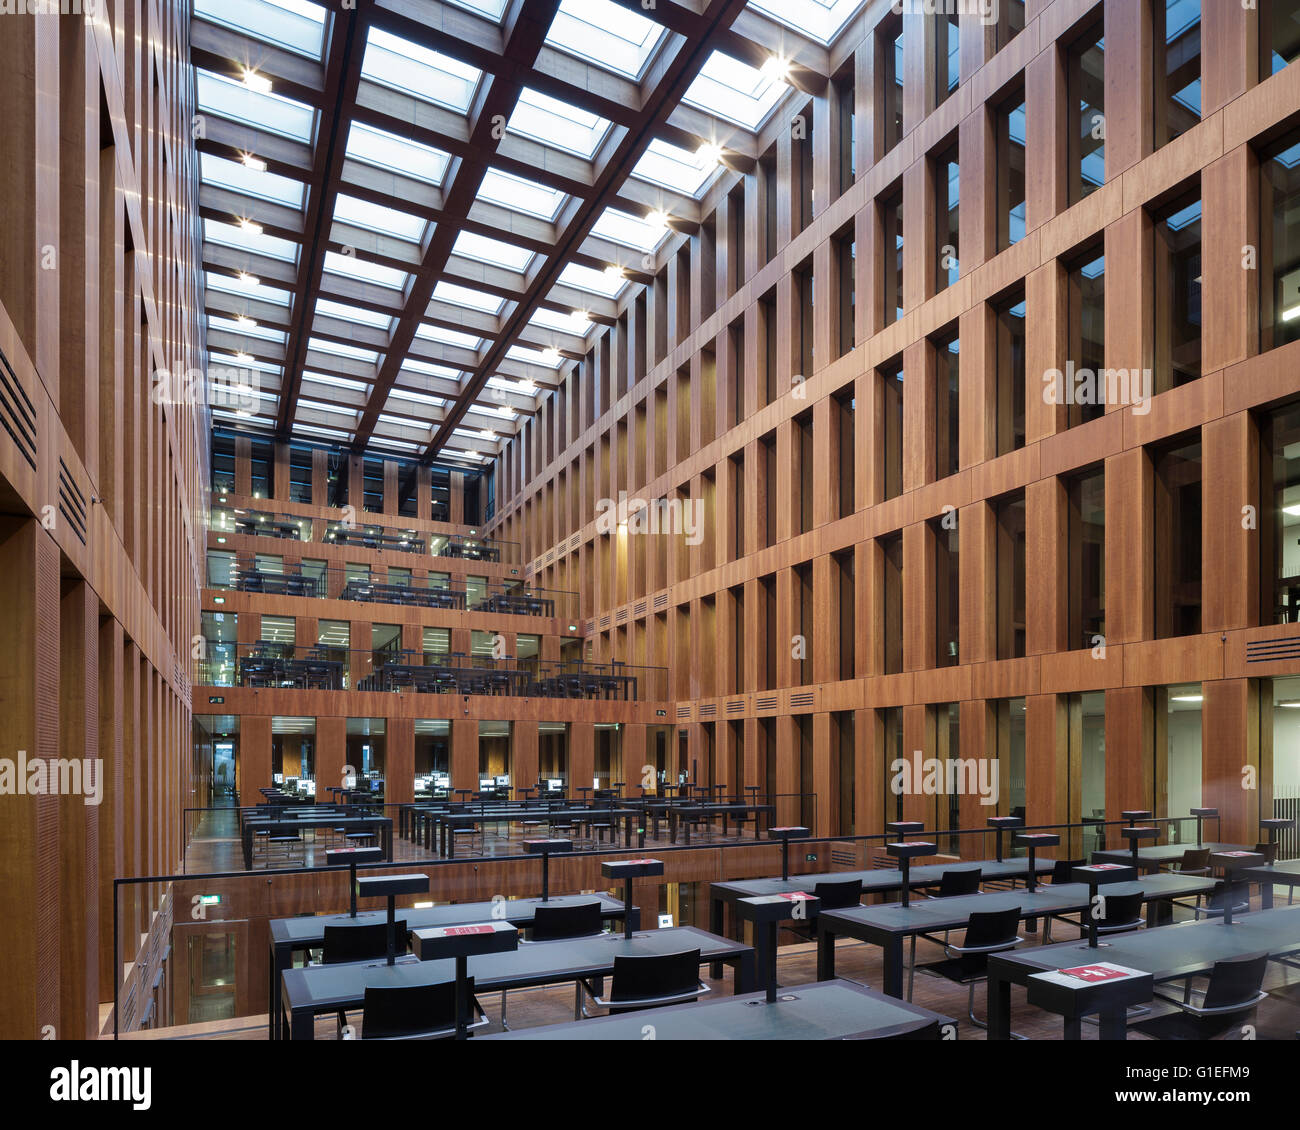 Jacob-und-Wilhelm-Grimm-Zentrum, Berlin, Germany. Open plan room with rows of contemporary style tables and chairs in rows. Stock Photo